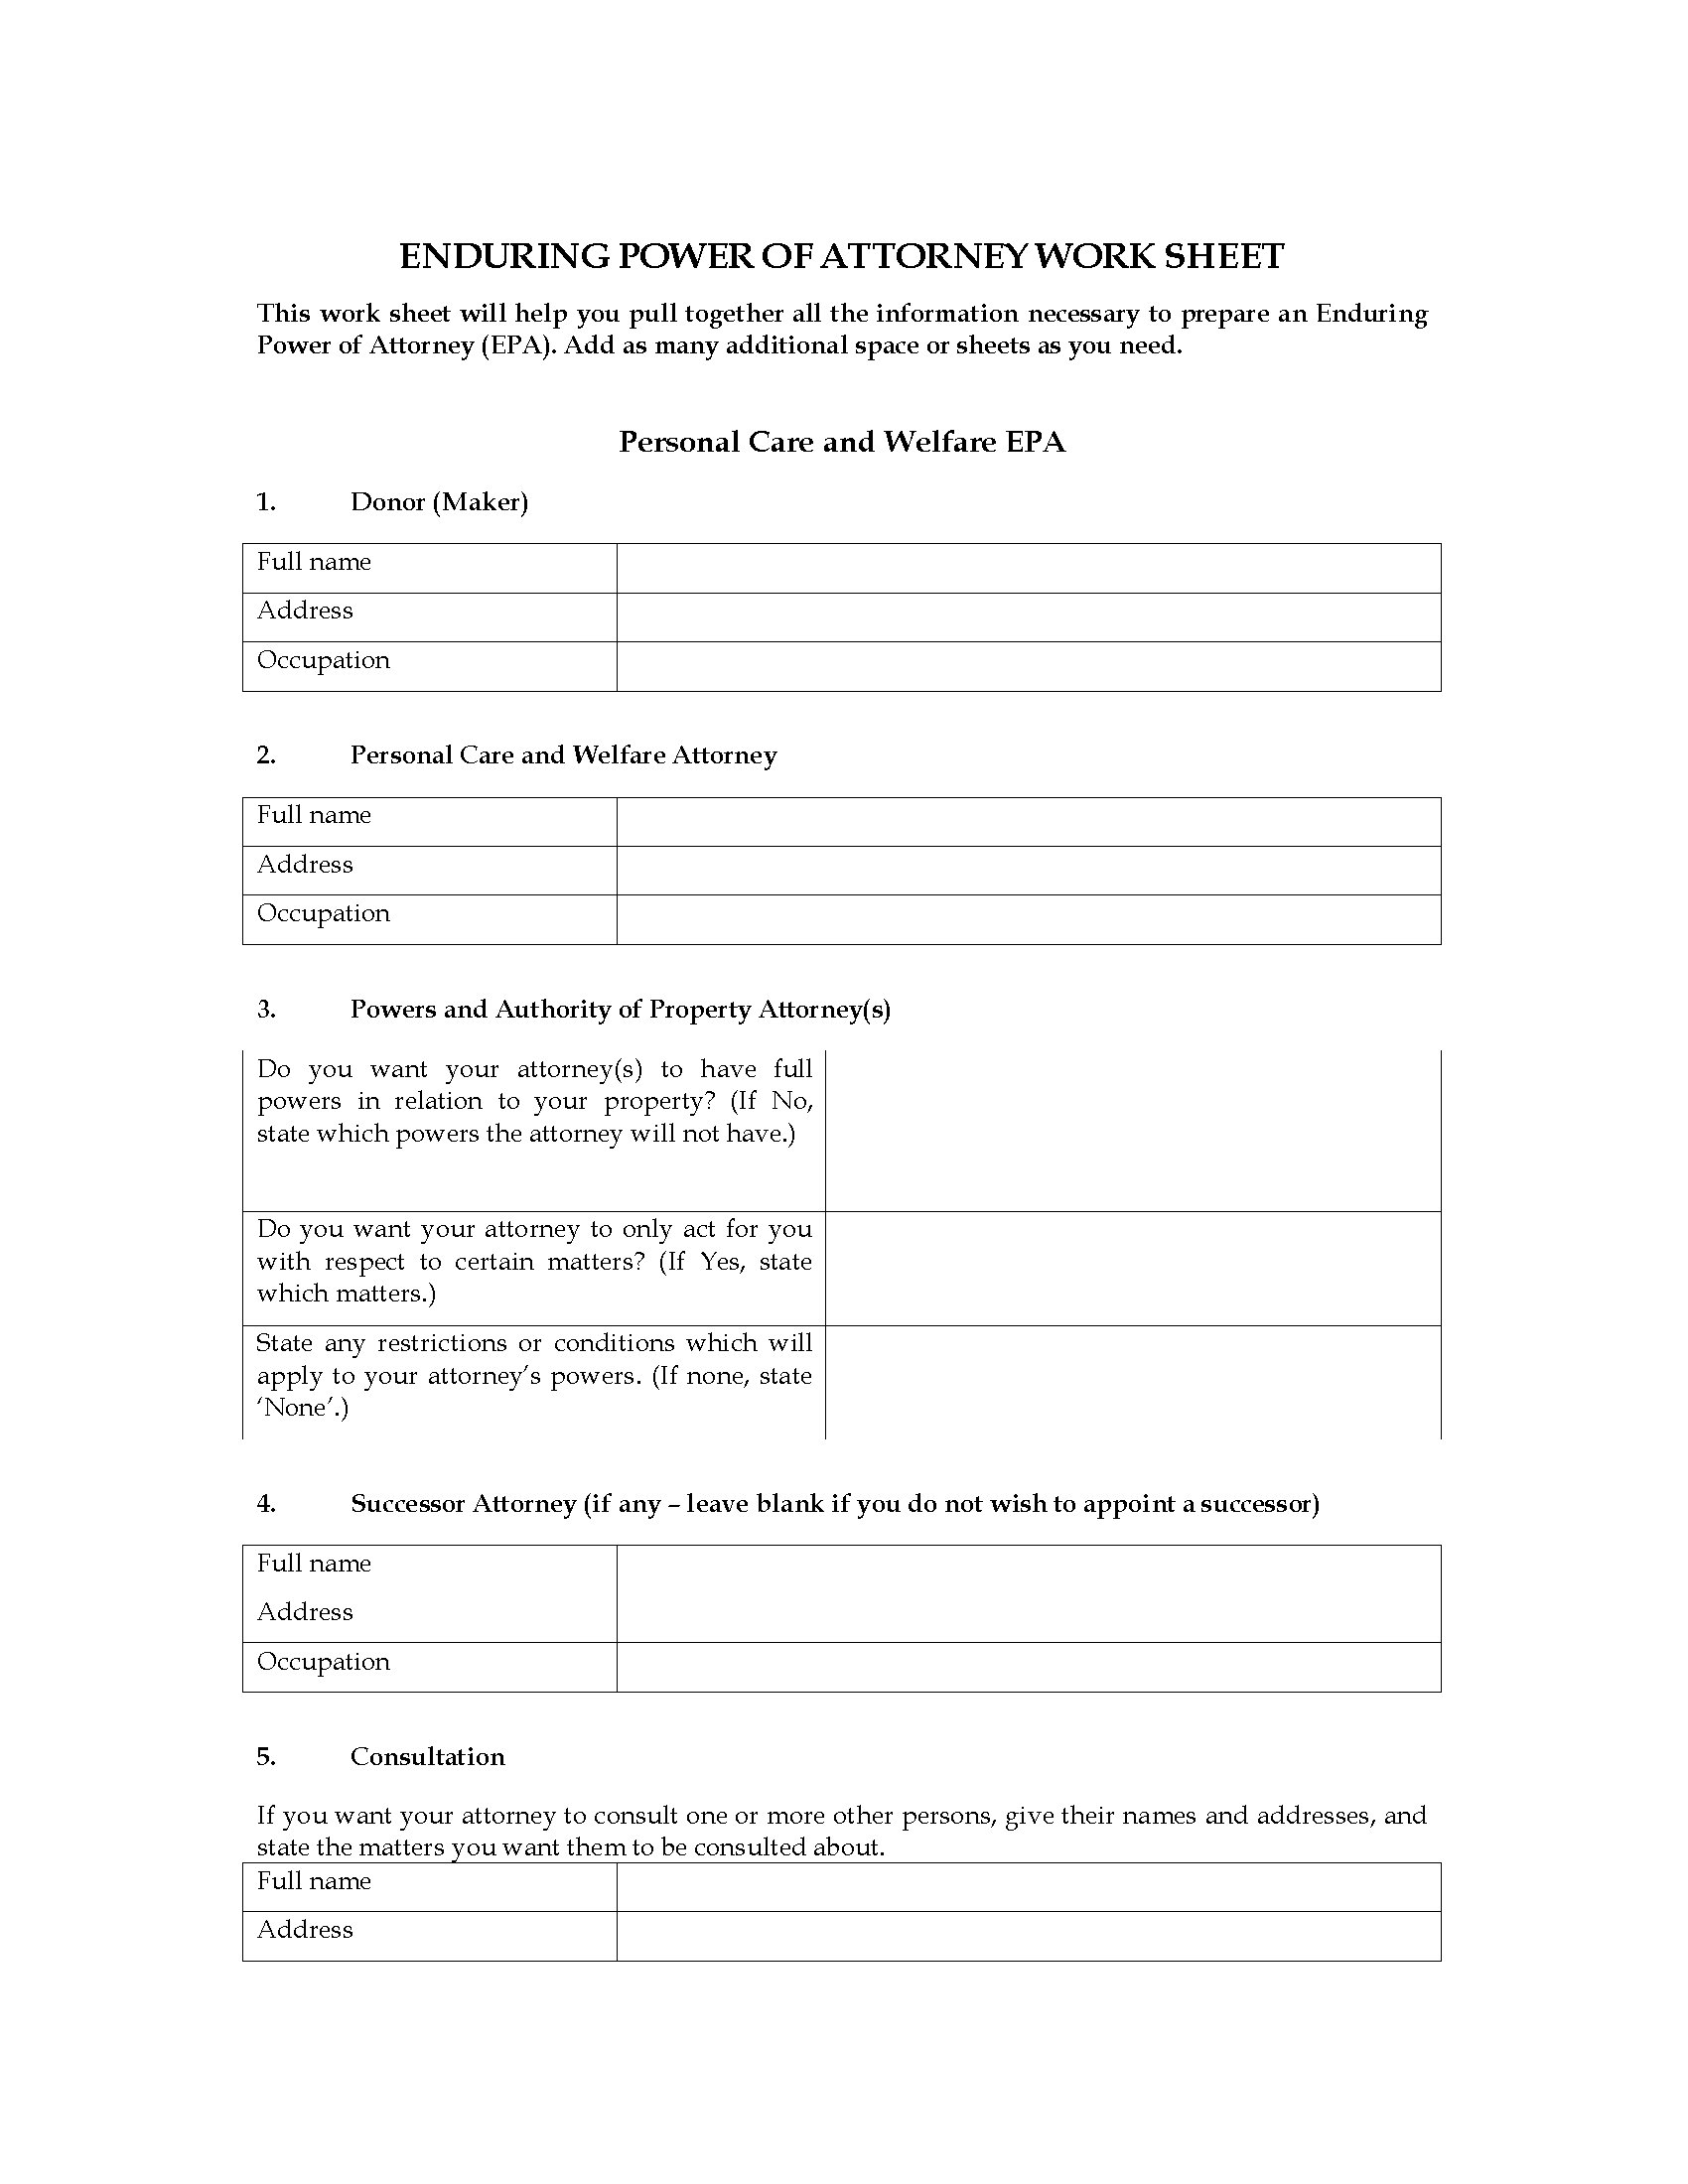 New Zealand Enduring Power Of Attorney Work Sheet Legal Forms And Business Templates Megadox Com